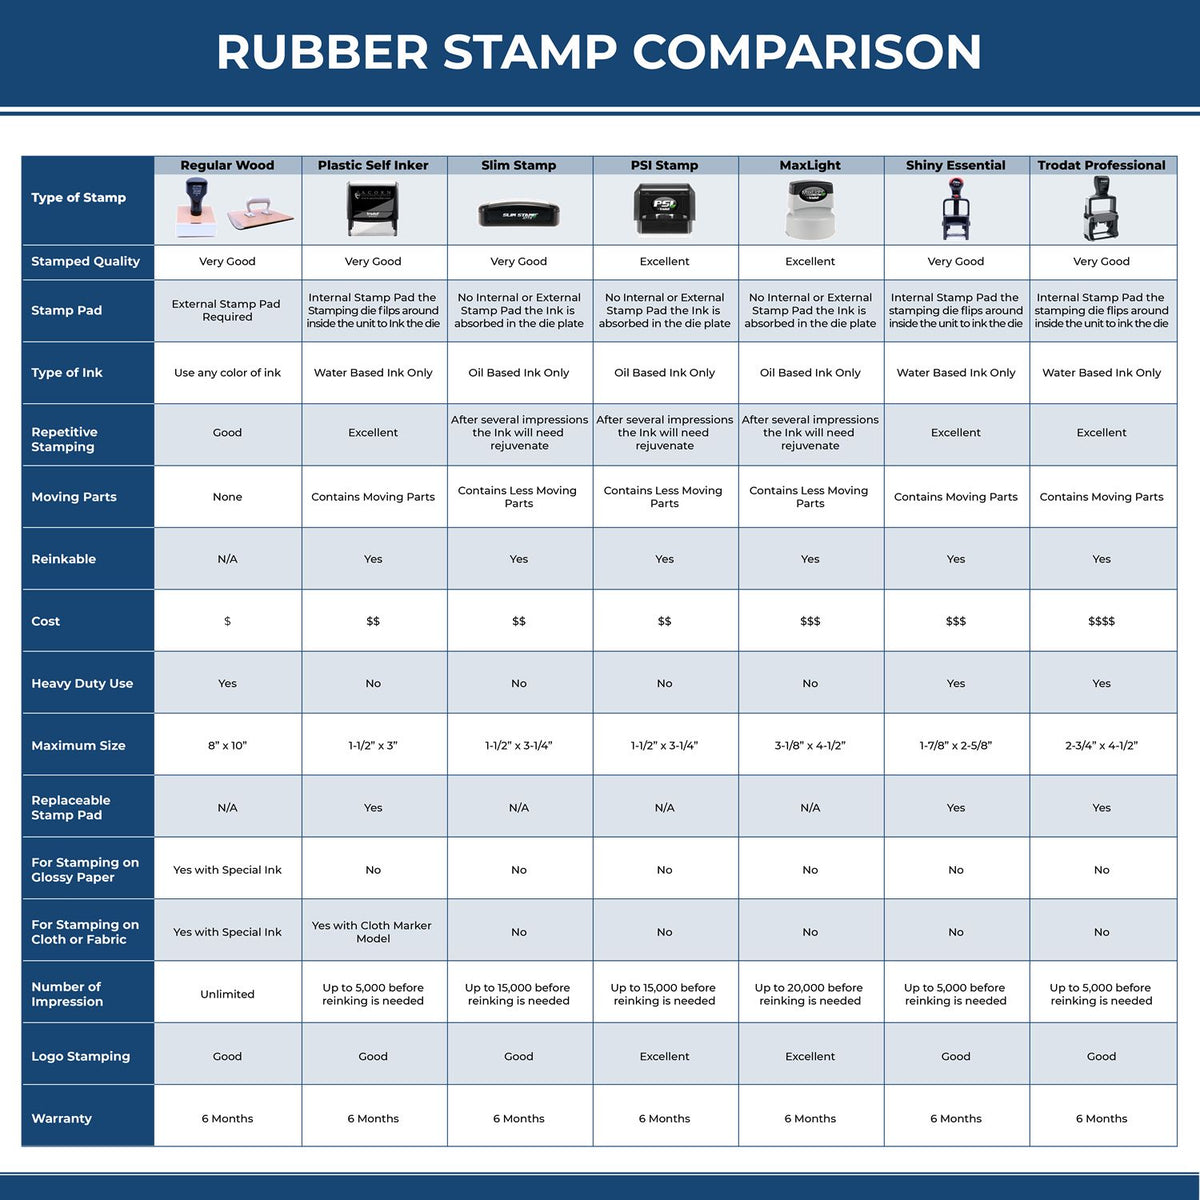 Large Not Approved For Construction Rubber Stamp 4137R Rubber Stamp Comparison